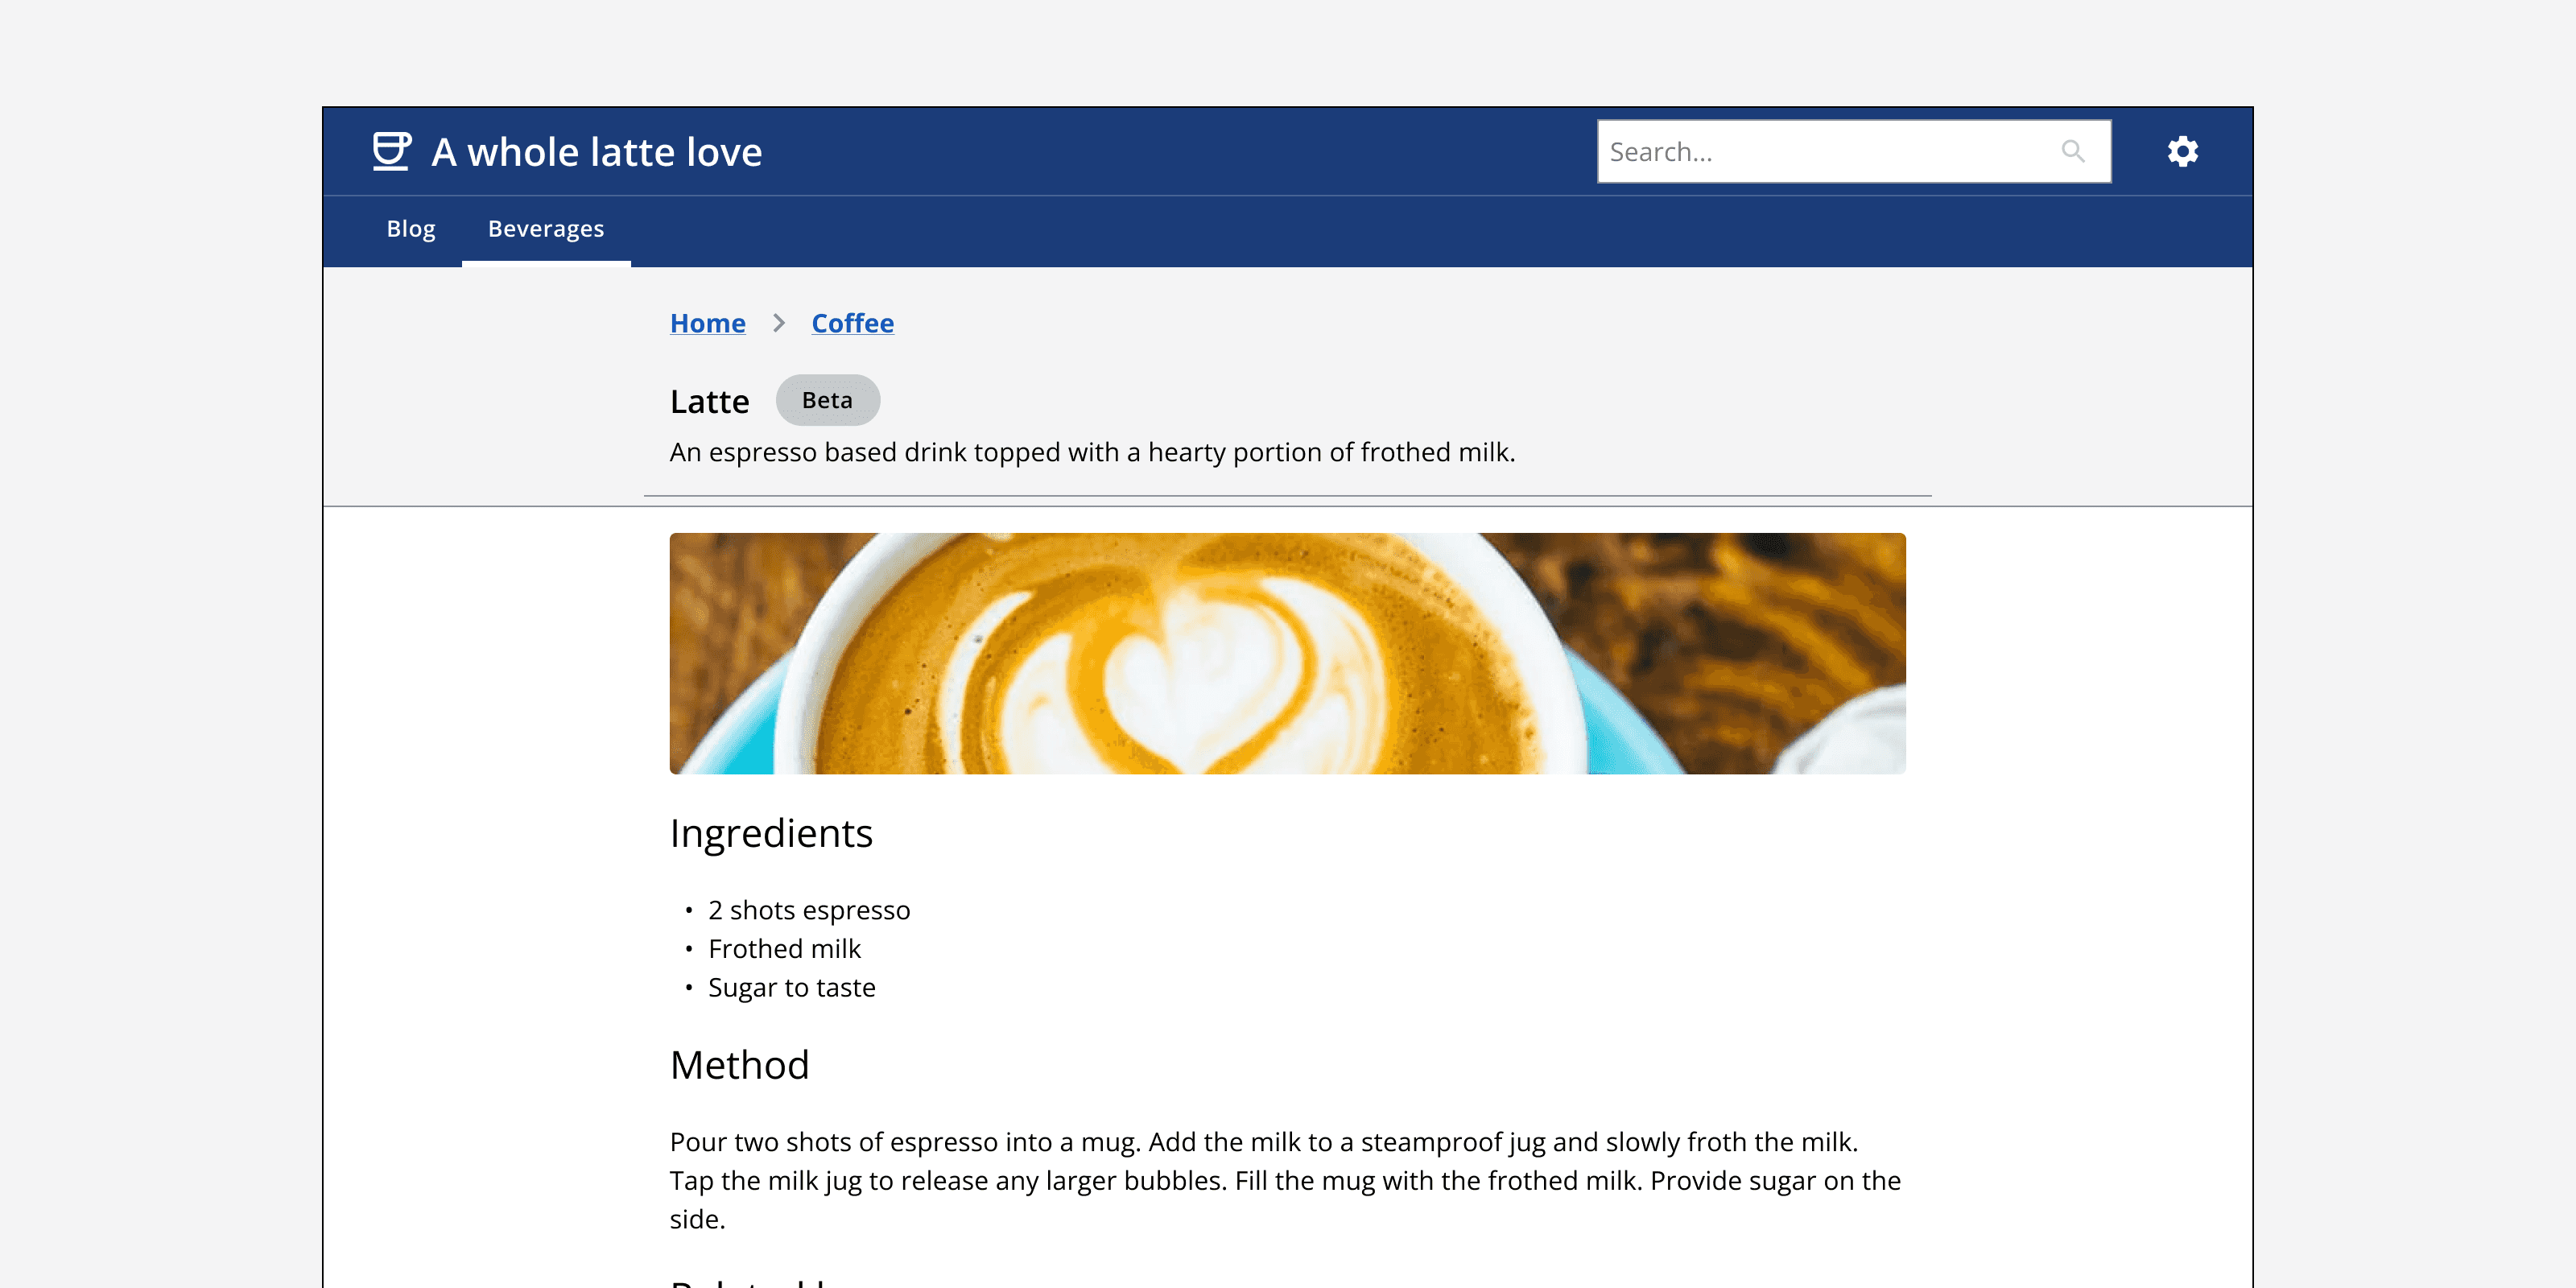 Above the page header is a breadcrumb component with links to parent pages for ‘Coffee’ and ‘Home’.